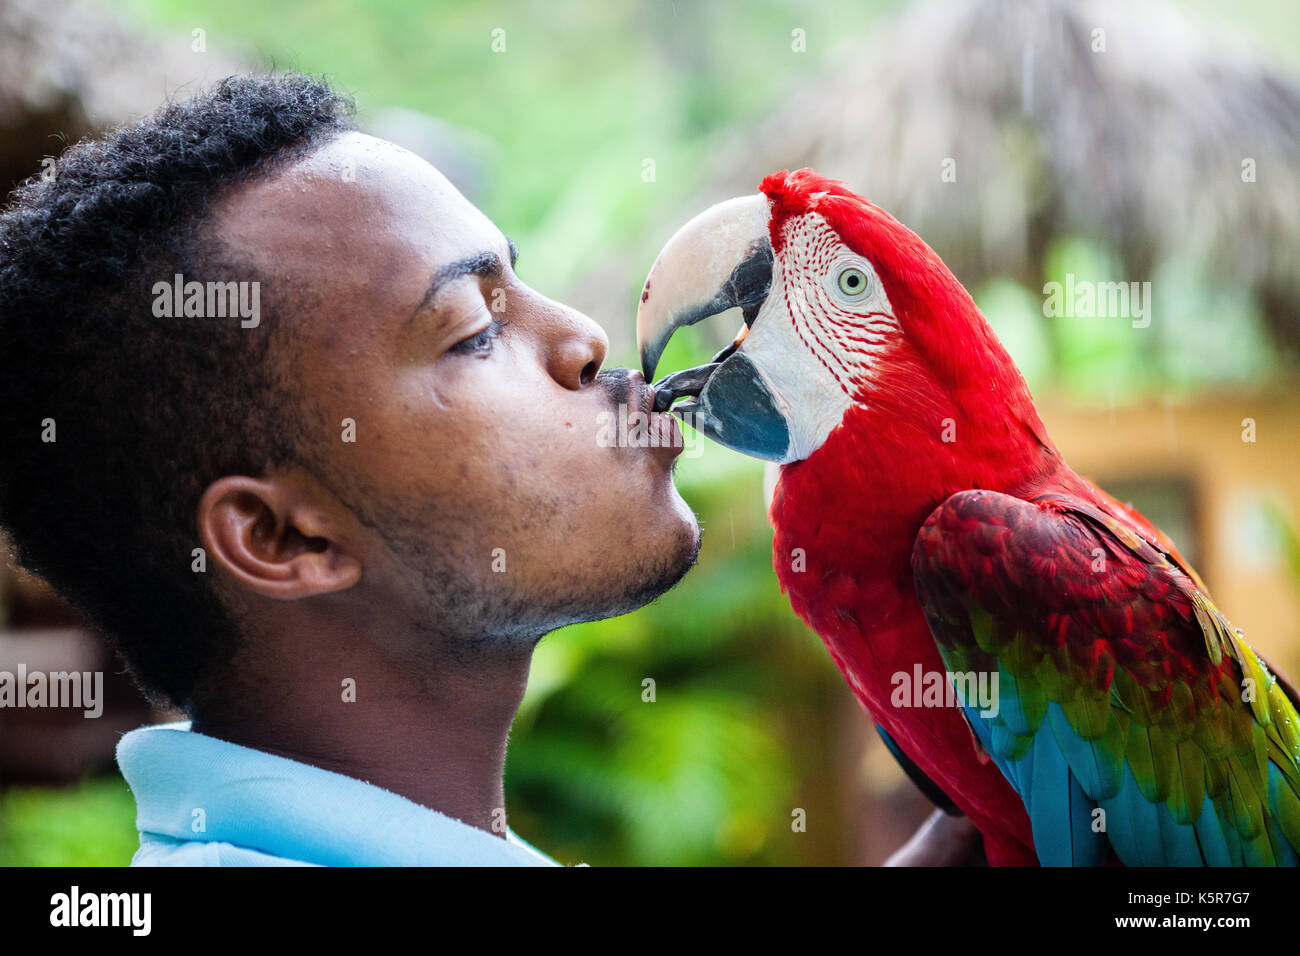 Men kissing a parrot in Dominican Republic Stock Photo